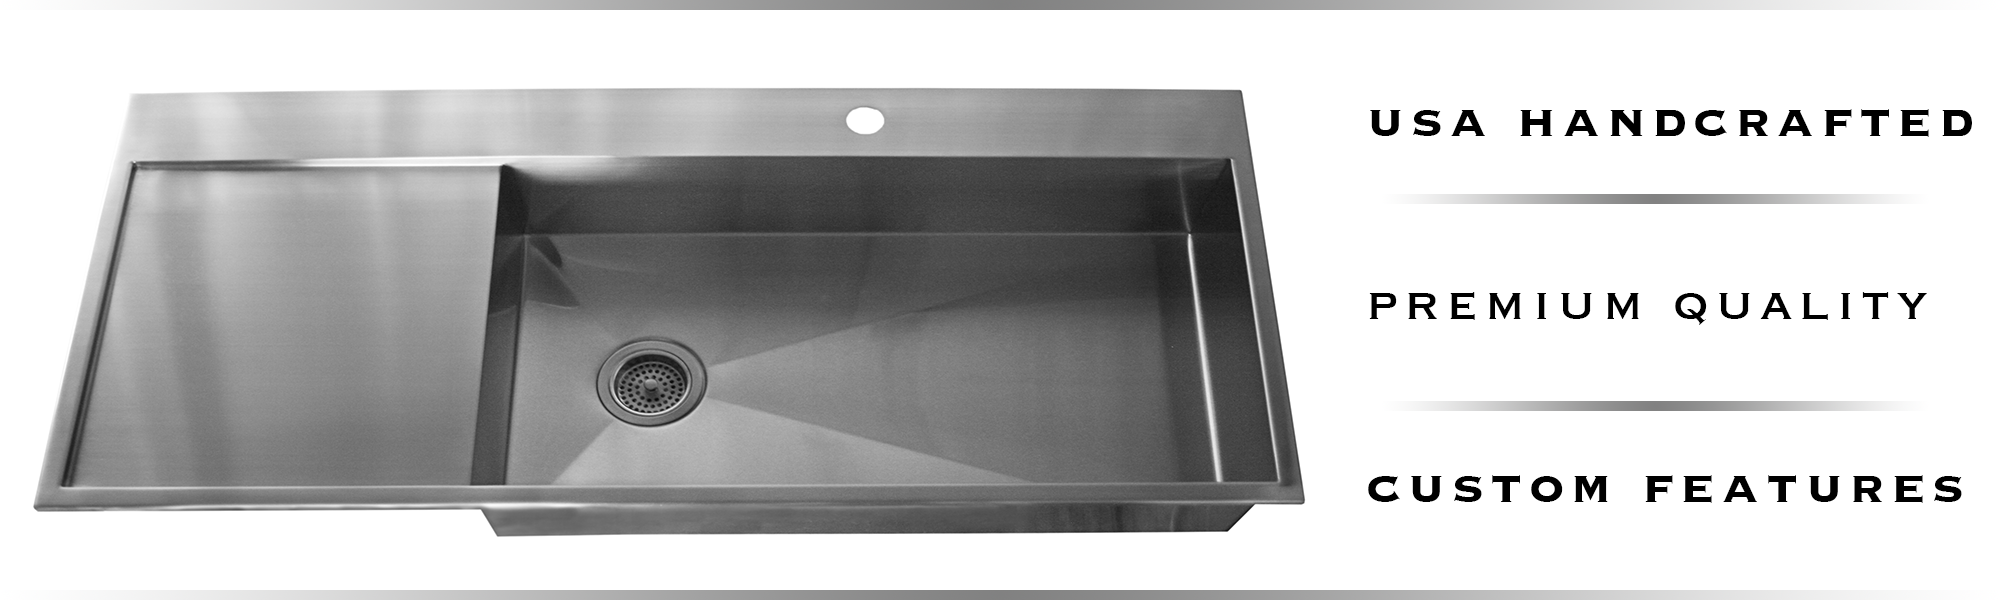 Copper And Stainless Steel Drainboard Sinks Havens